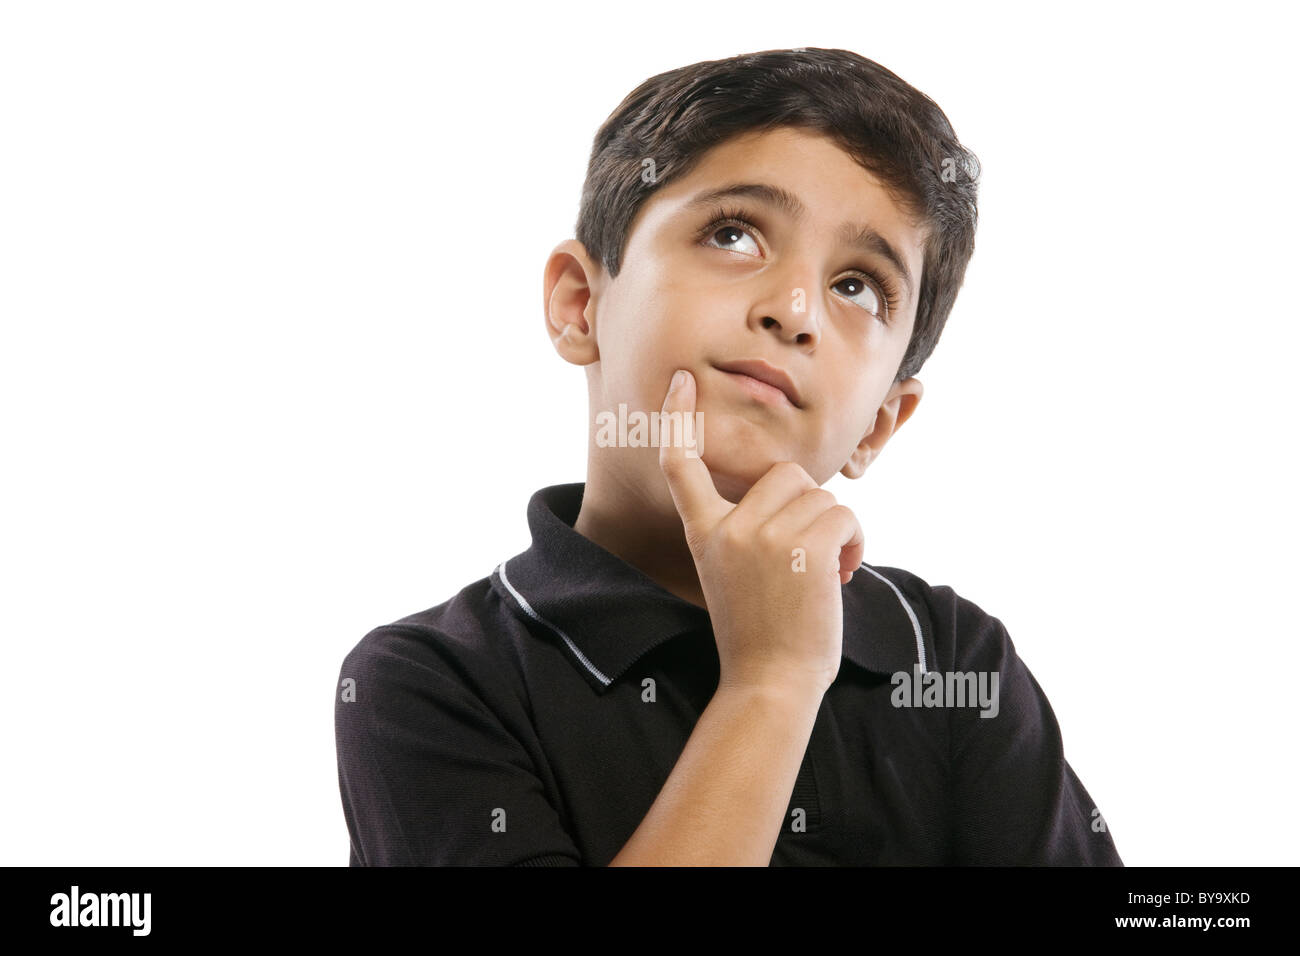 Young boy thinking Stock Photo